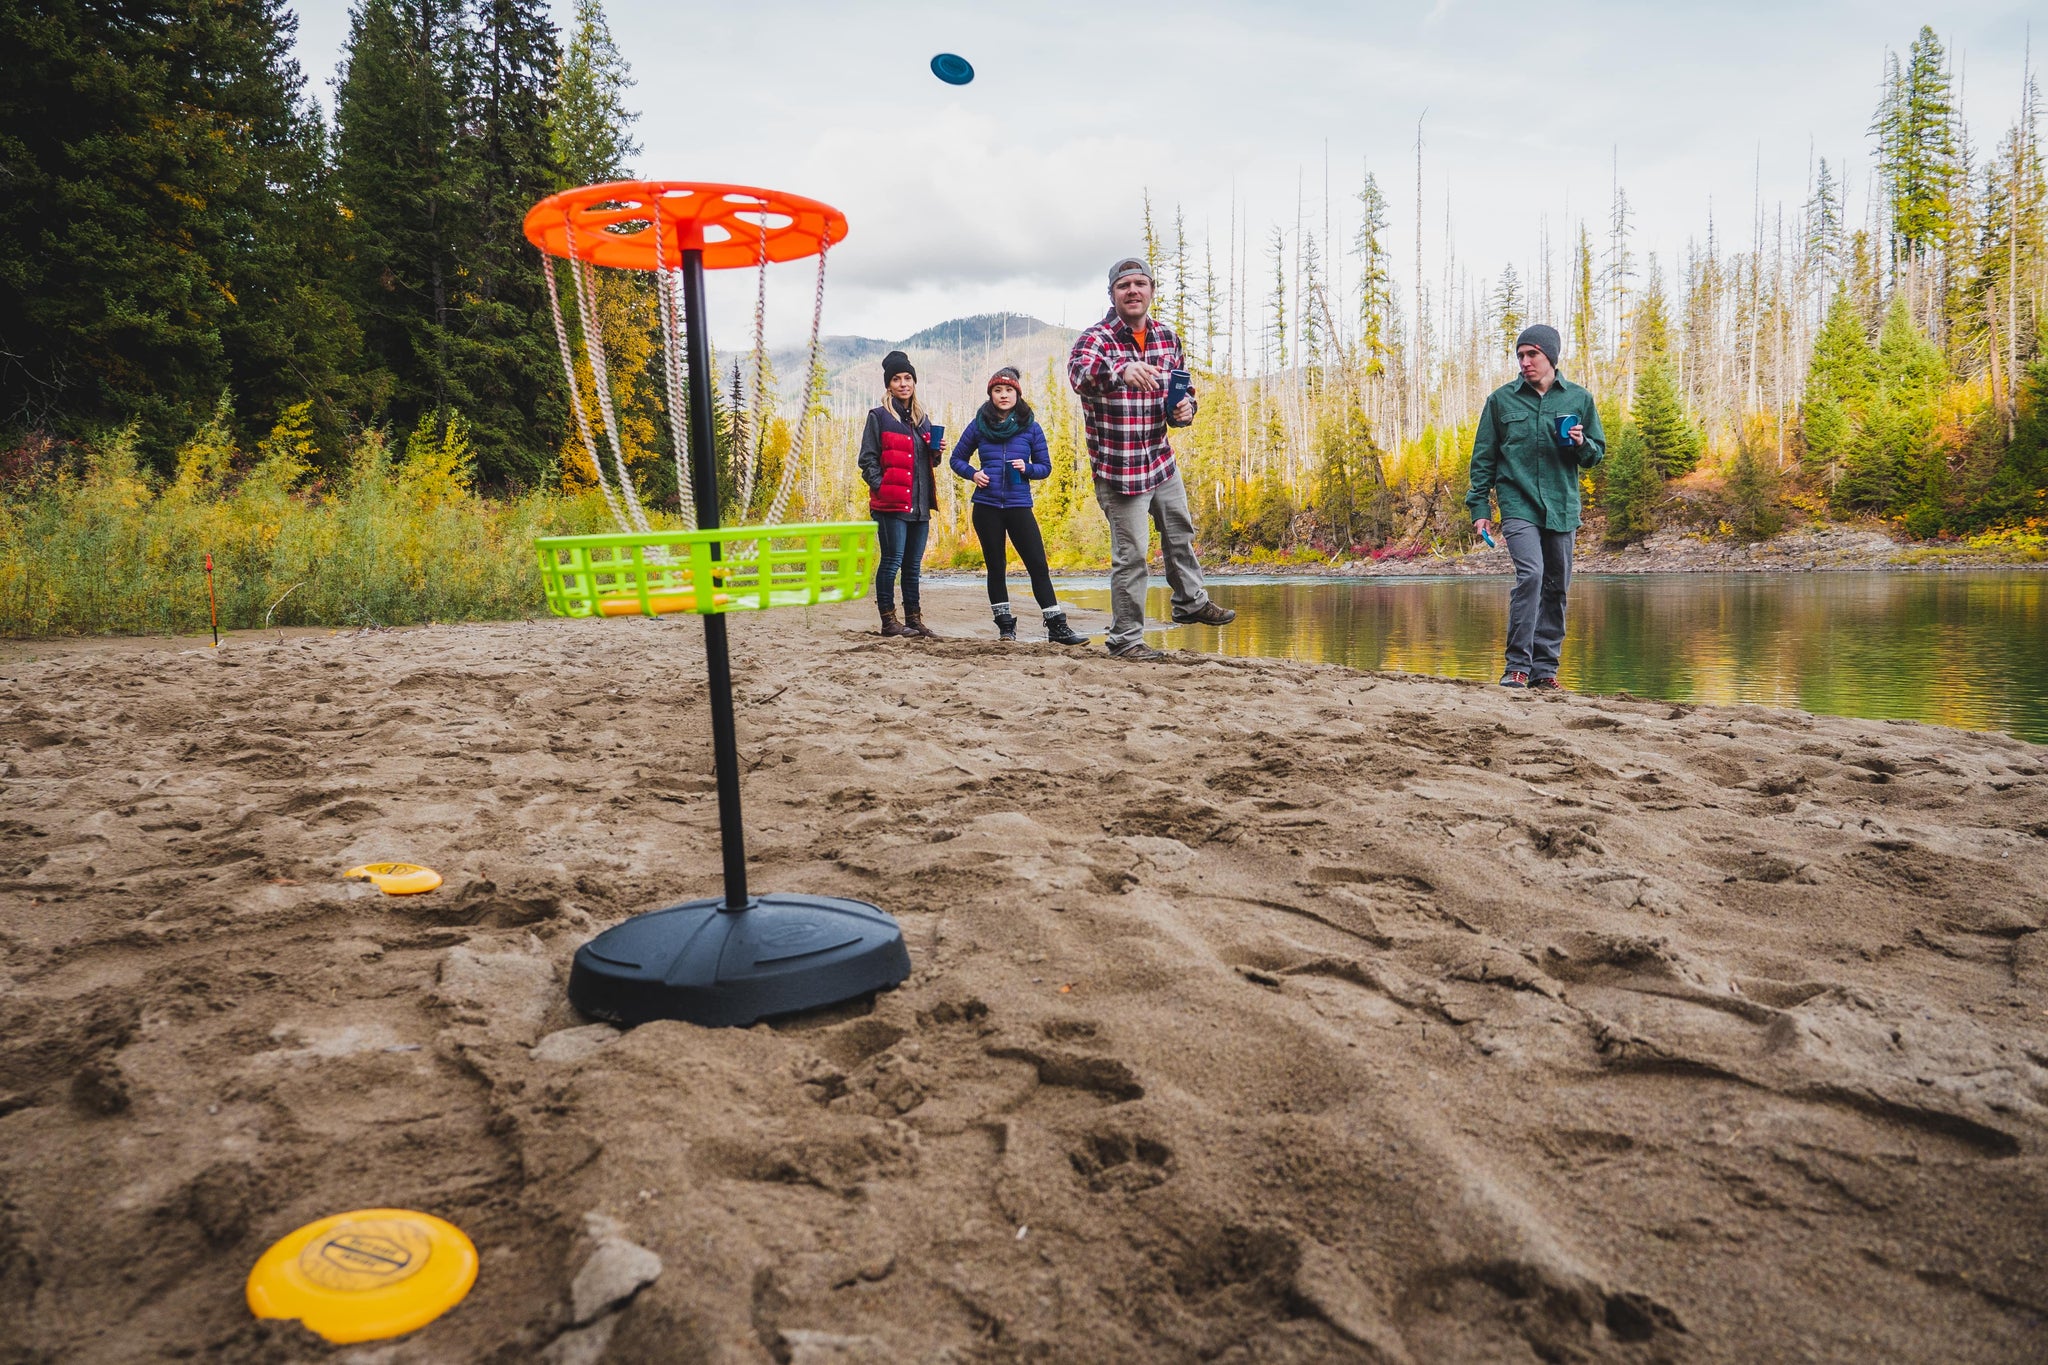 Next time you go camping or don't want to leave your backyard, pull out your own frisbee golf setup.